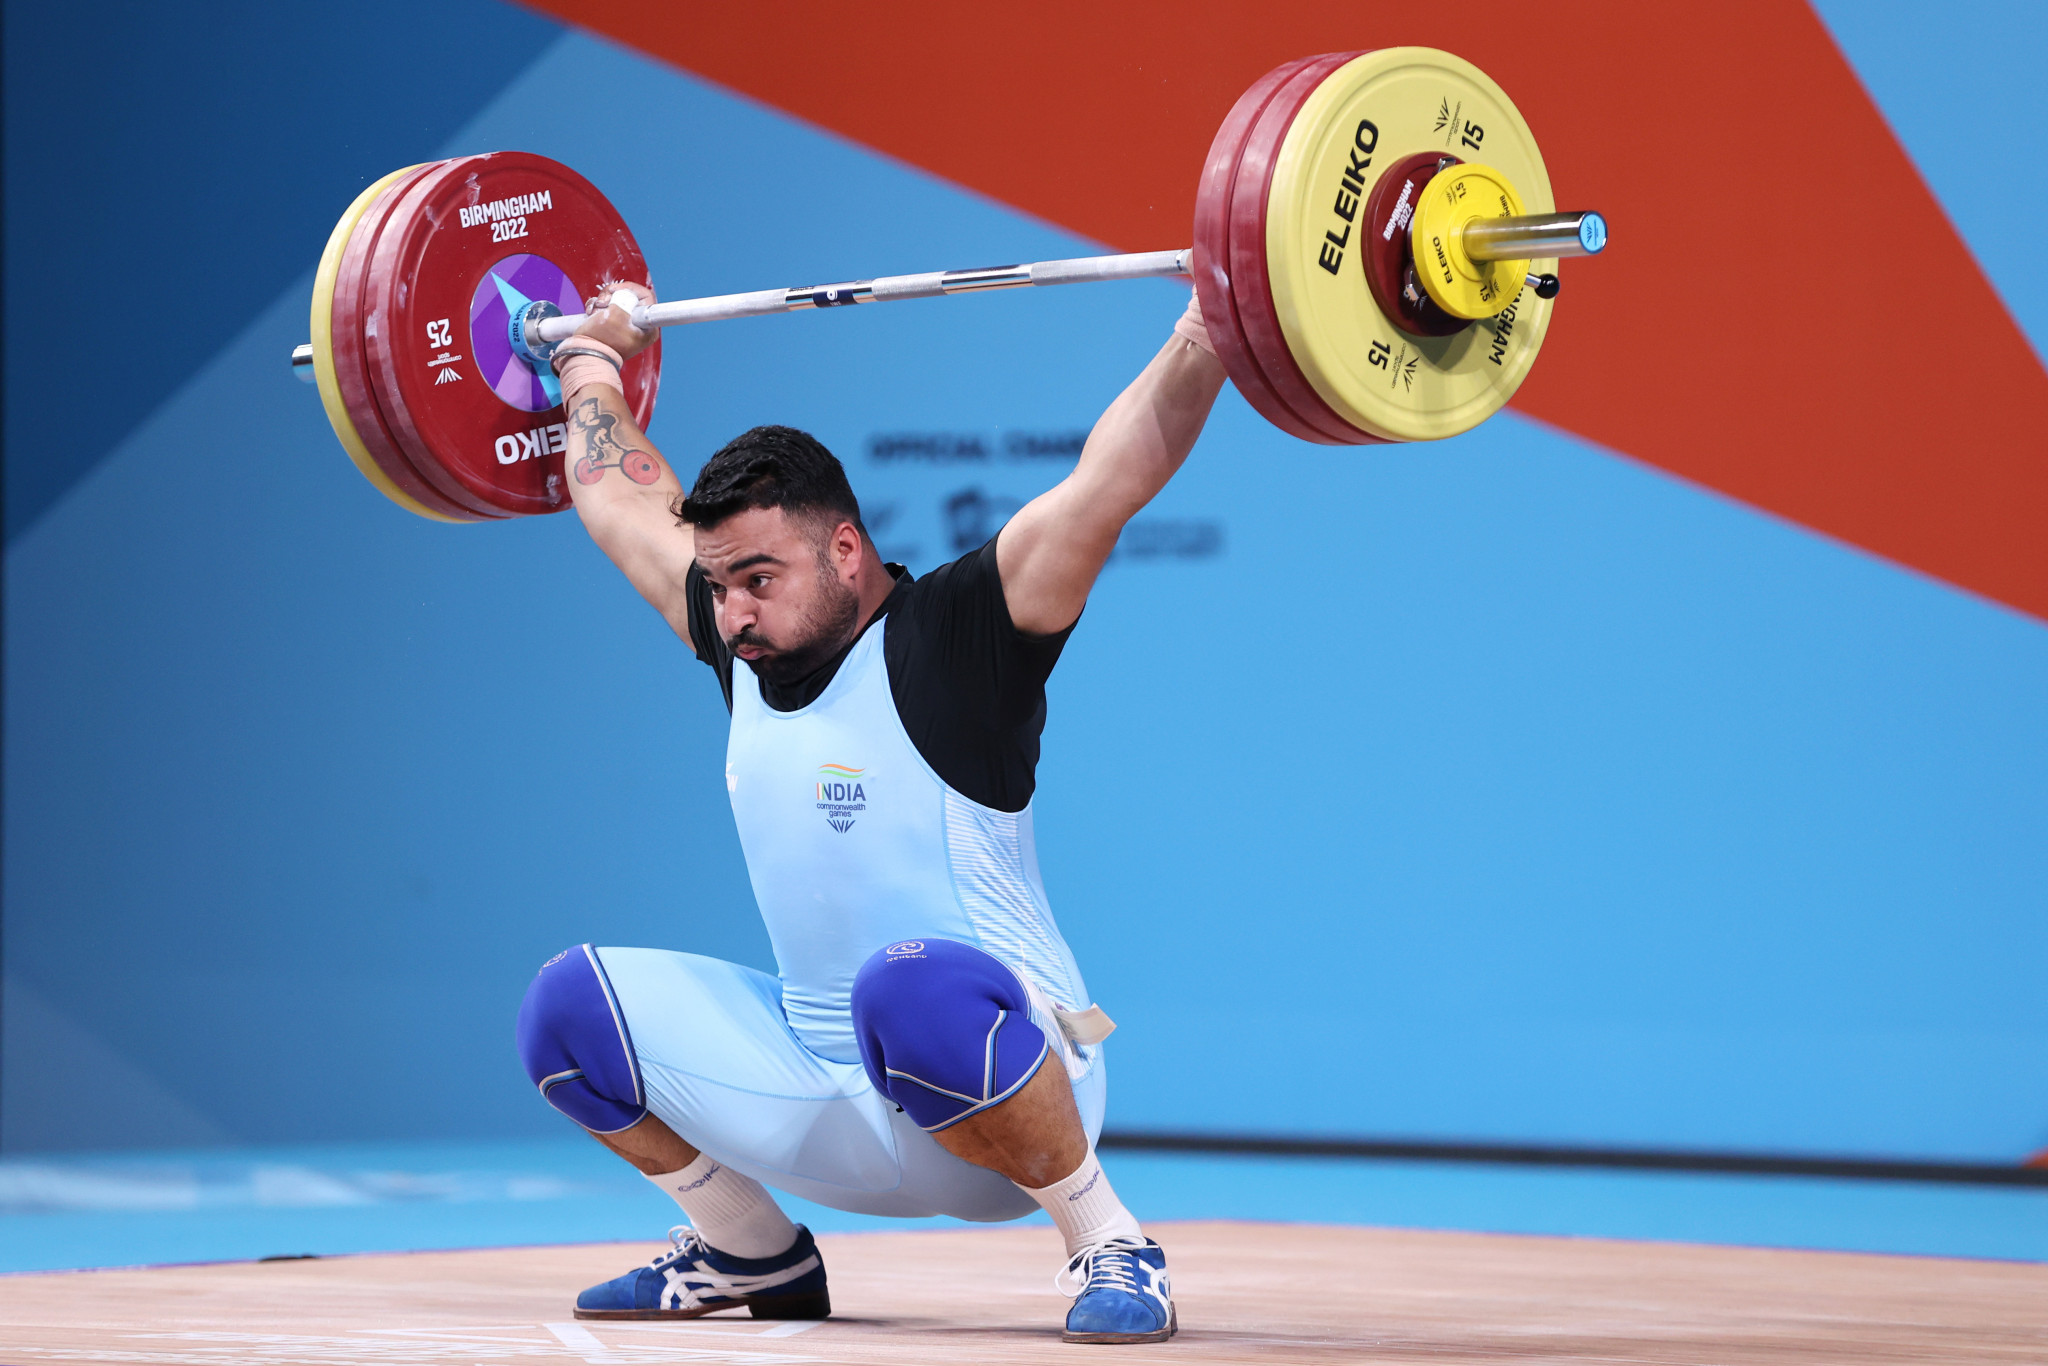 The Snatch is the first part of a weightlifting event ©Getty Images